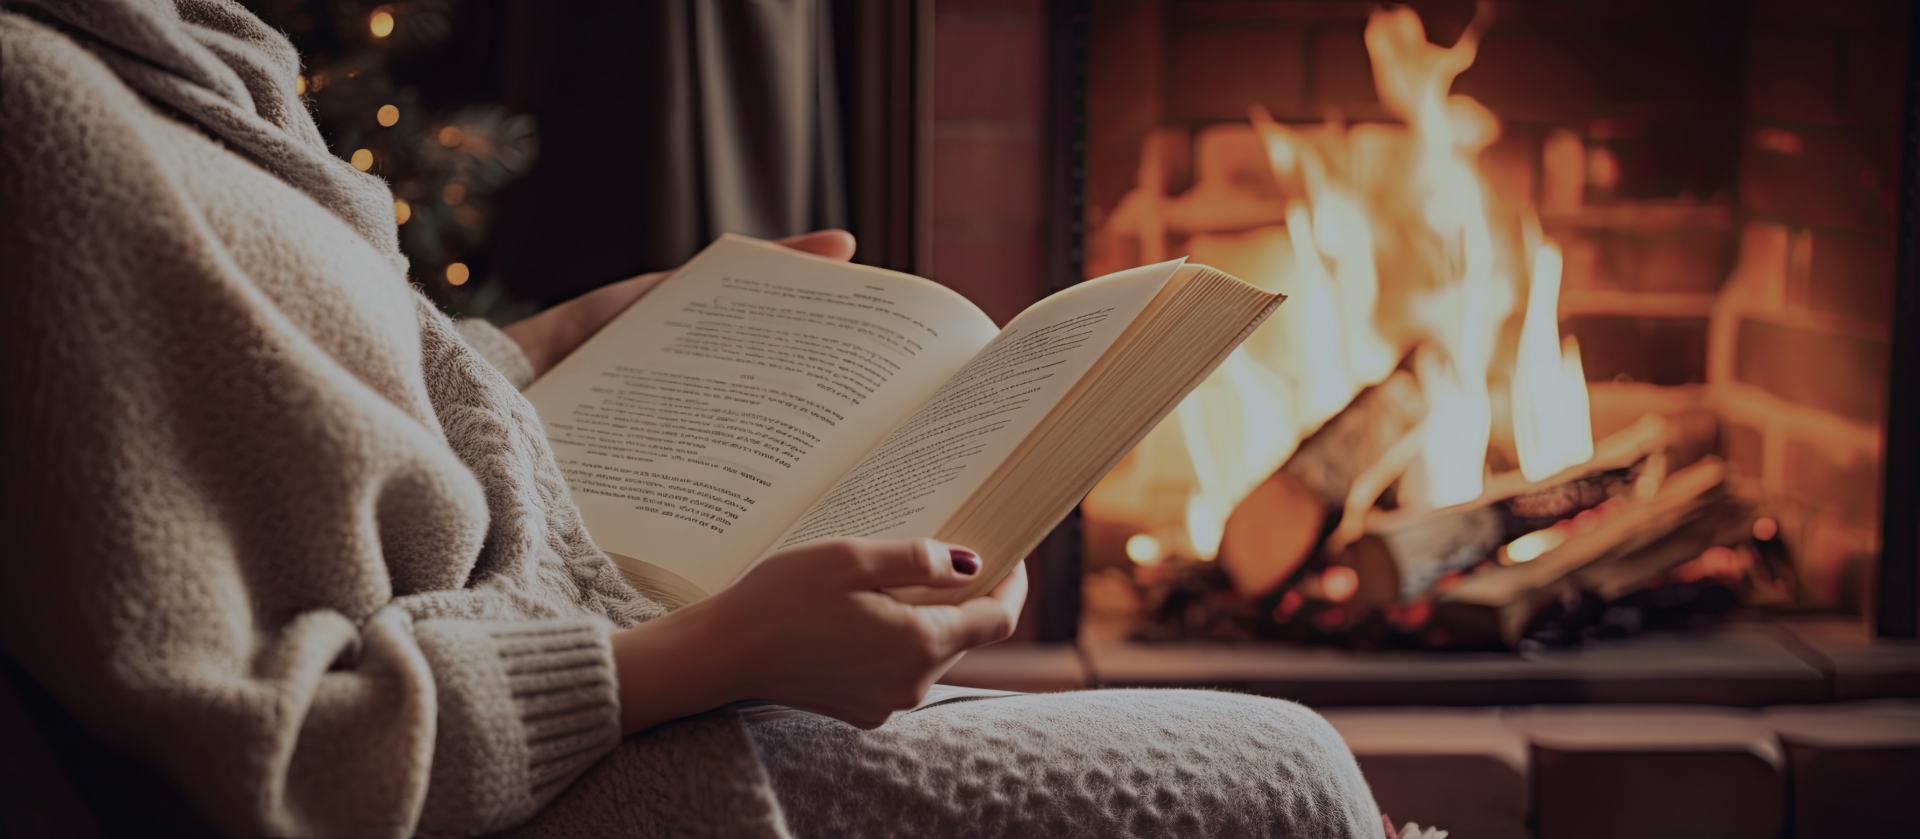 Editor's picks: Books to read (or gift) during the holidays